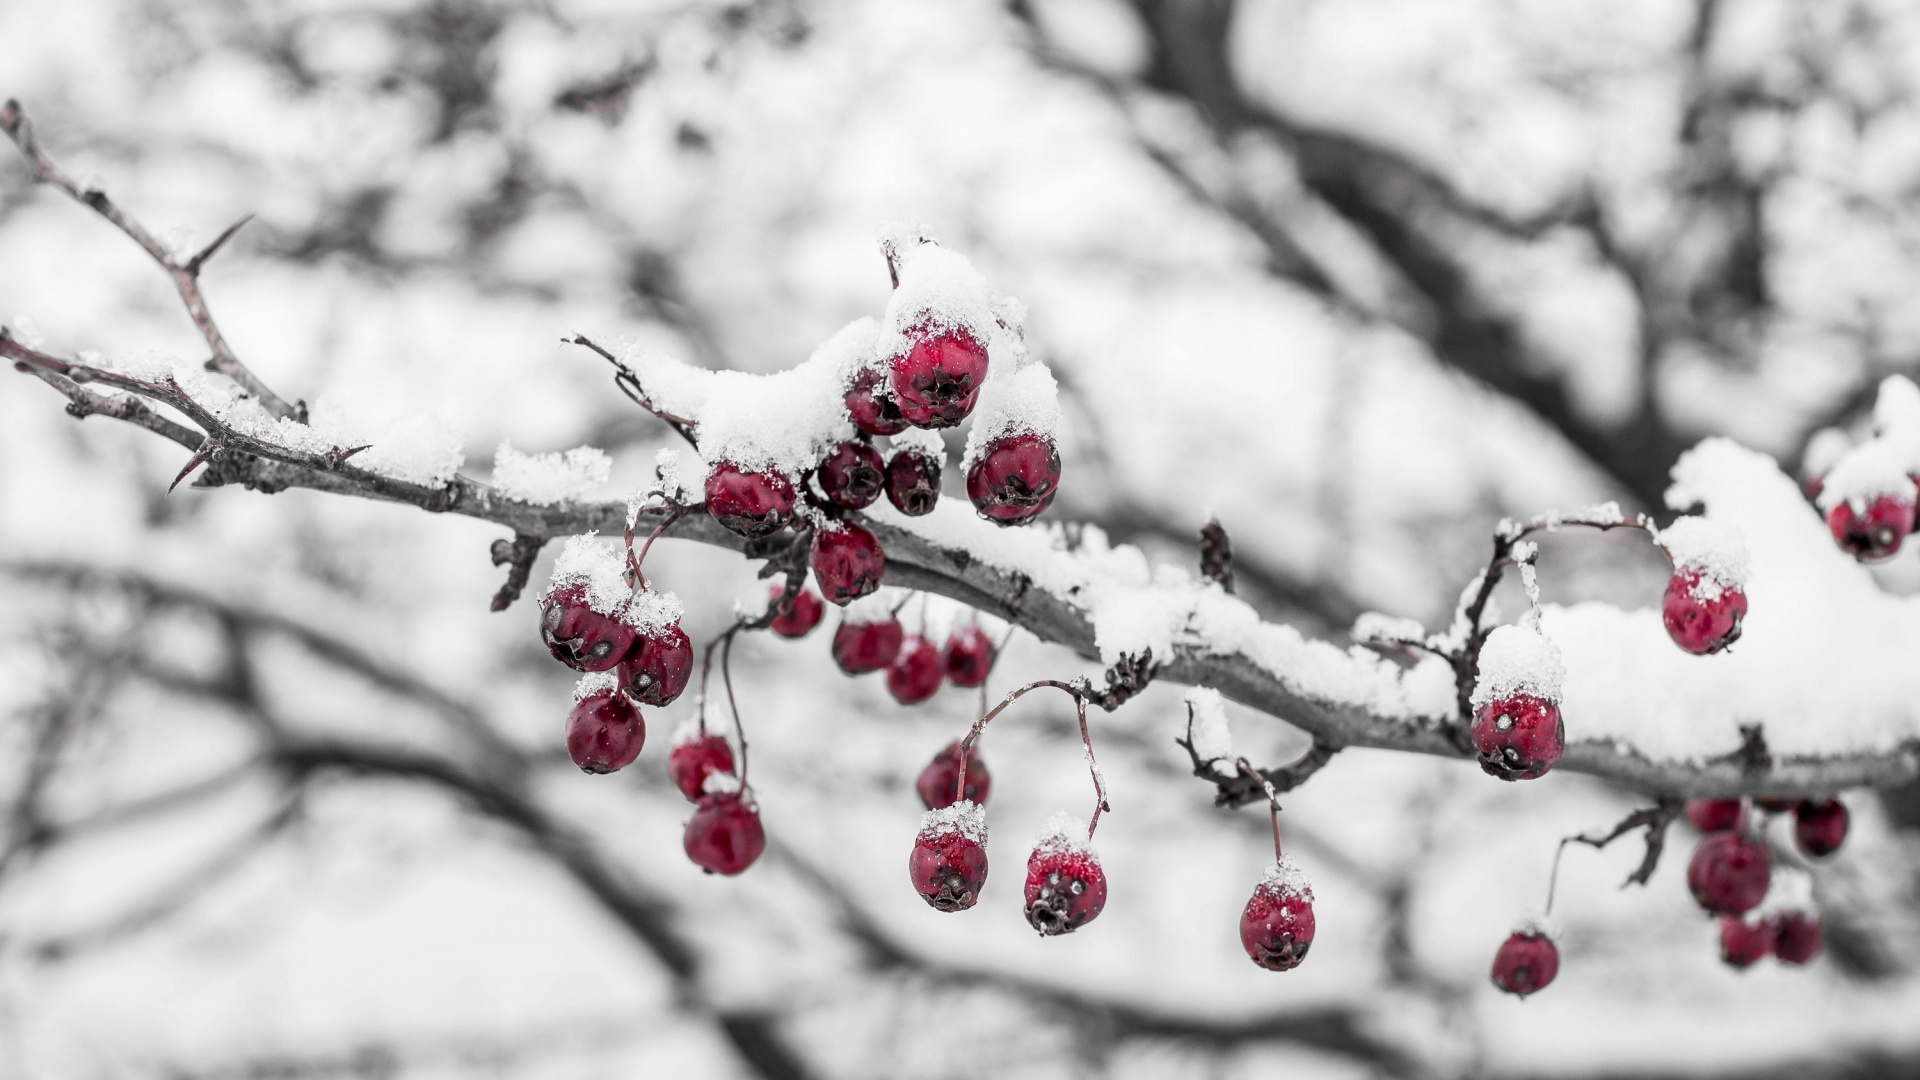 Red Round Fruits on Tree Branch. Wallpaper in 1920x1080 Resolution